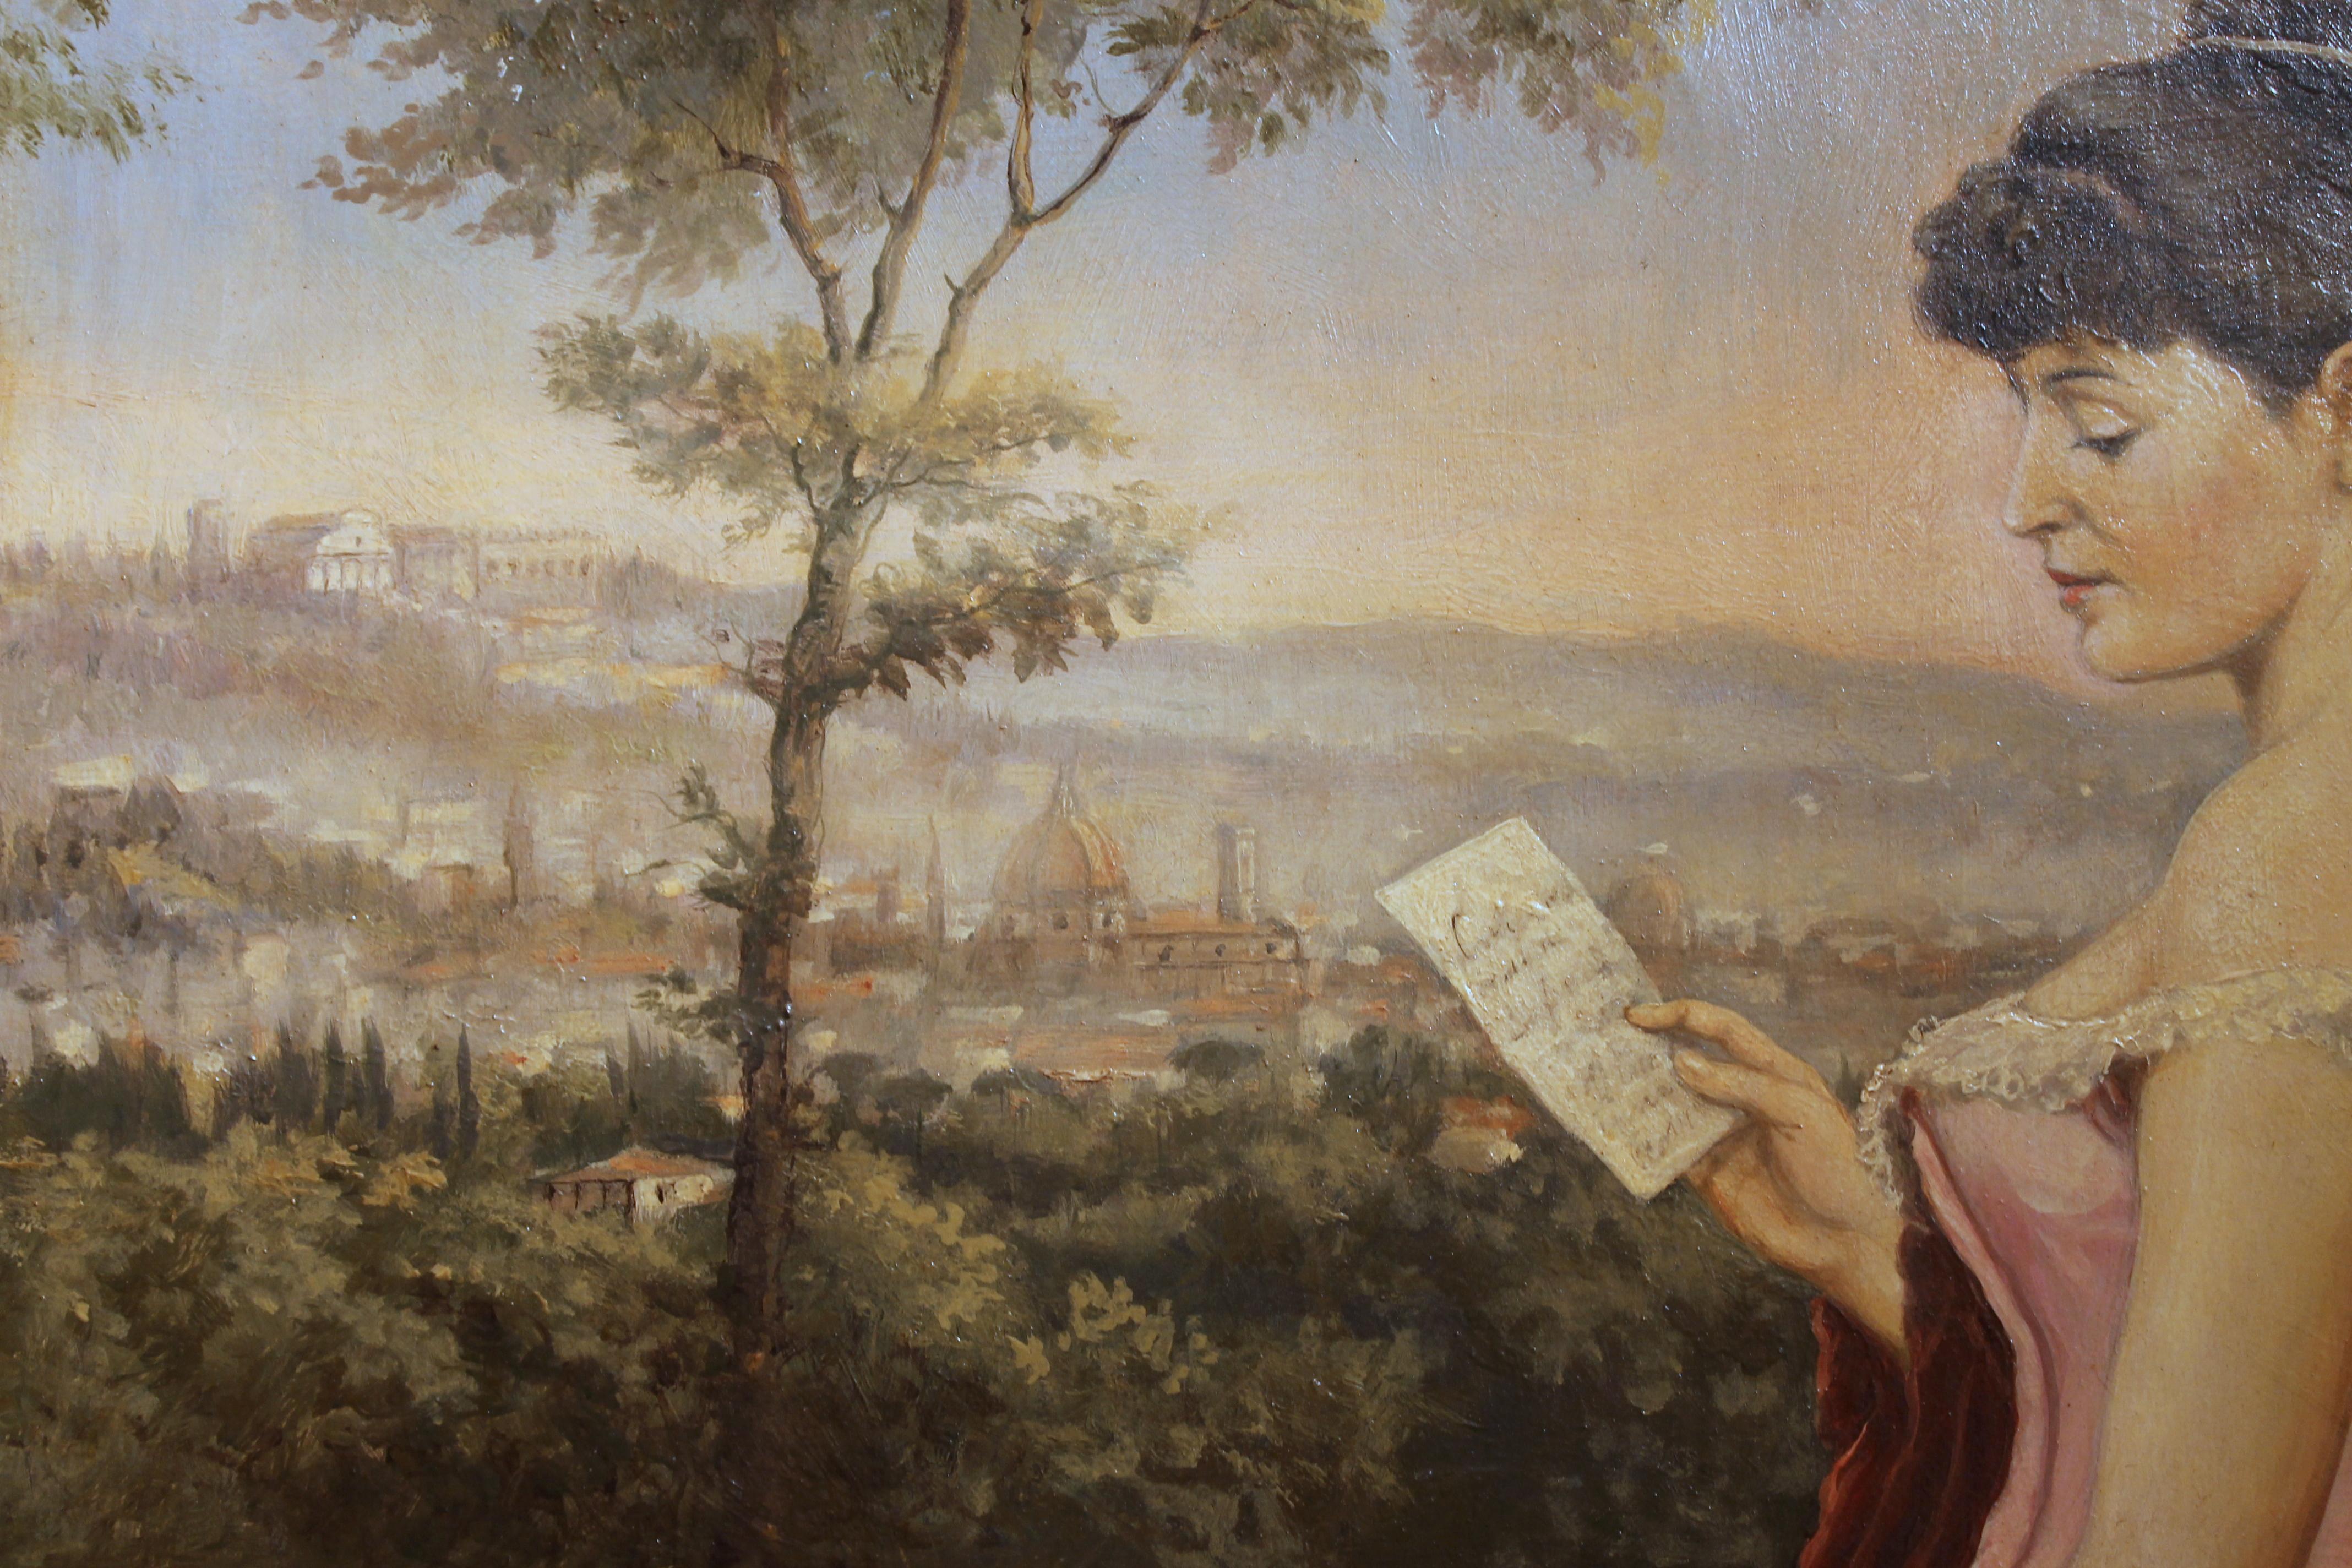 The landscape with the hills of Florence, its monuments and Brunelleschi's cathedral serve as an elegant backdrop for this romantic portrait of an elegant Italian lady. The woman painted in an off-the-shoulder pink evening gown is reading a love